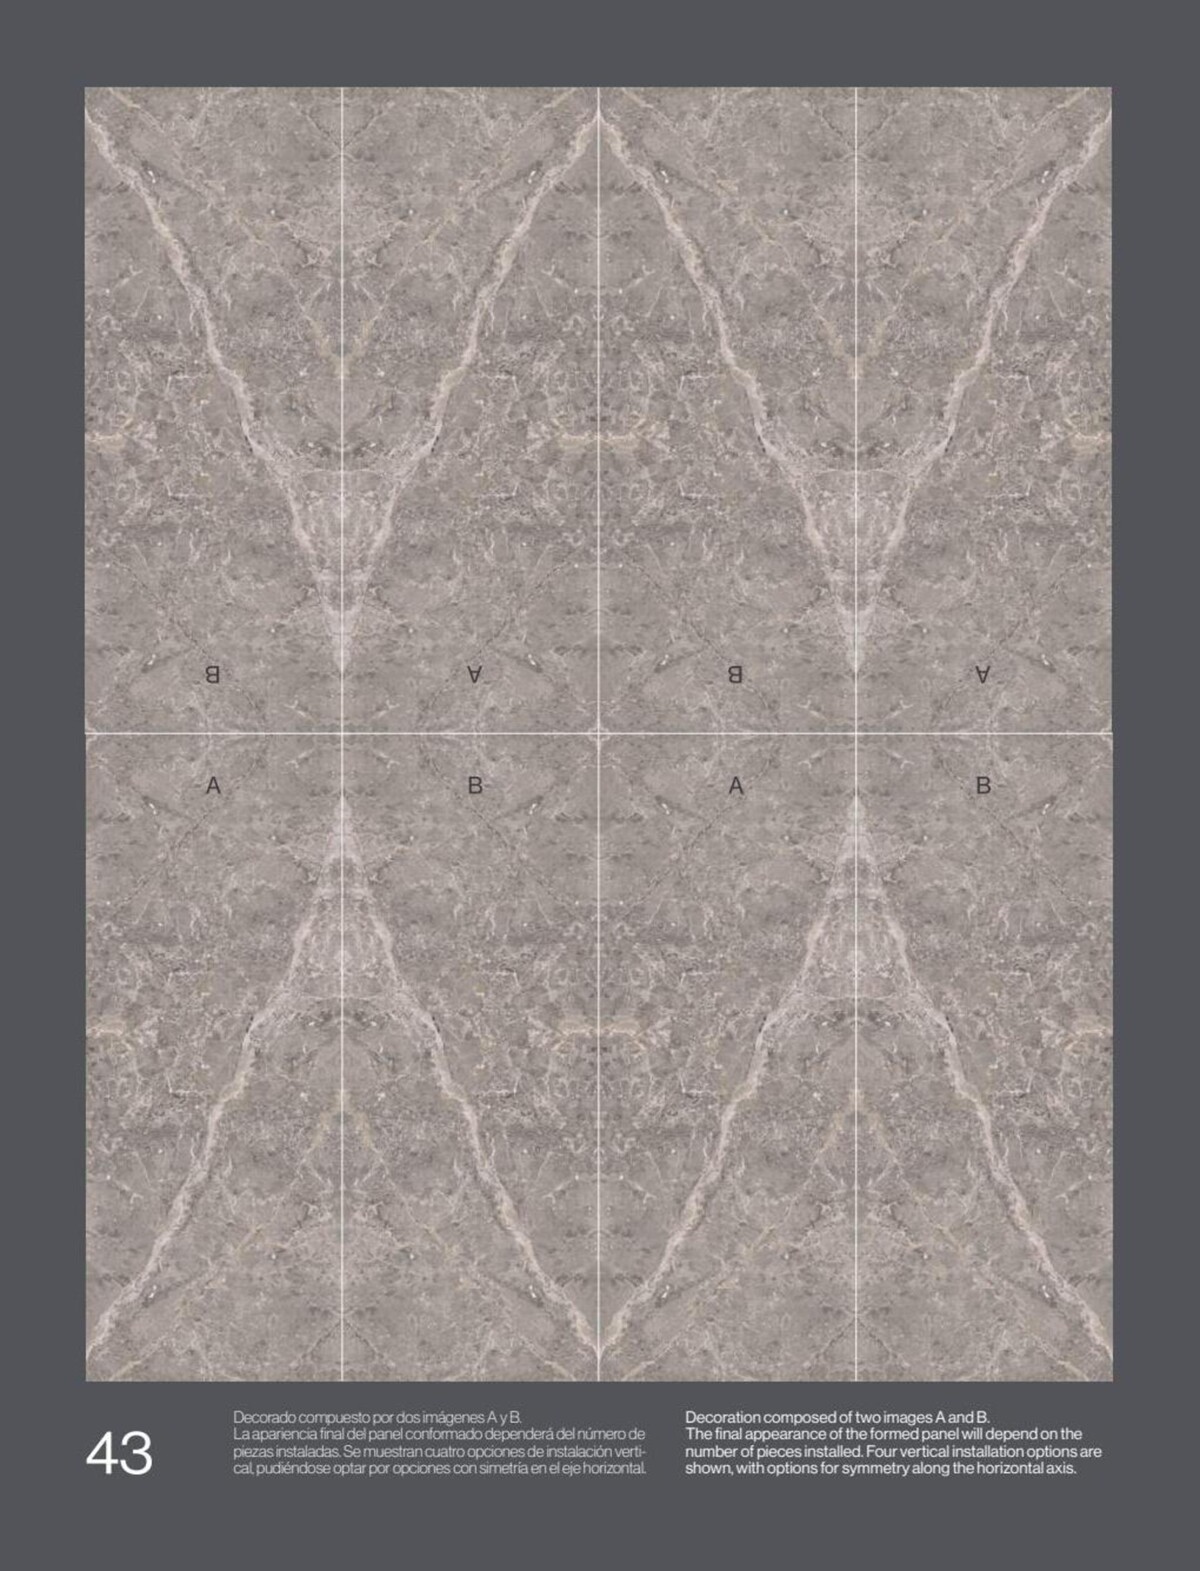 Catalogue MARMI,a ceramic tile that echoes the purity of marble, page 00043